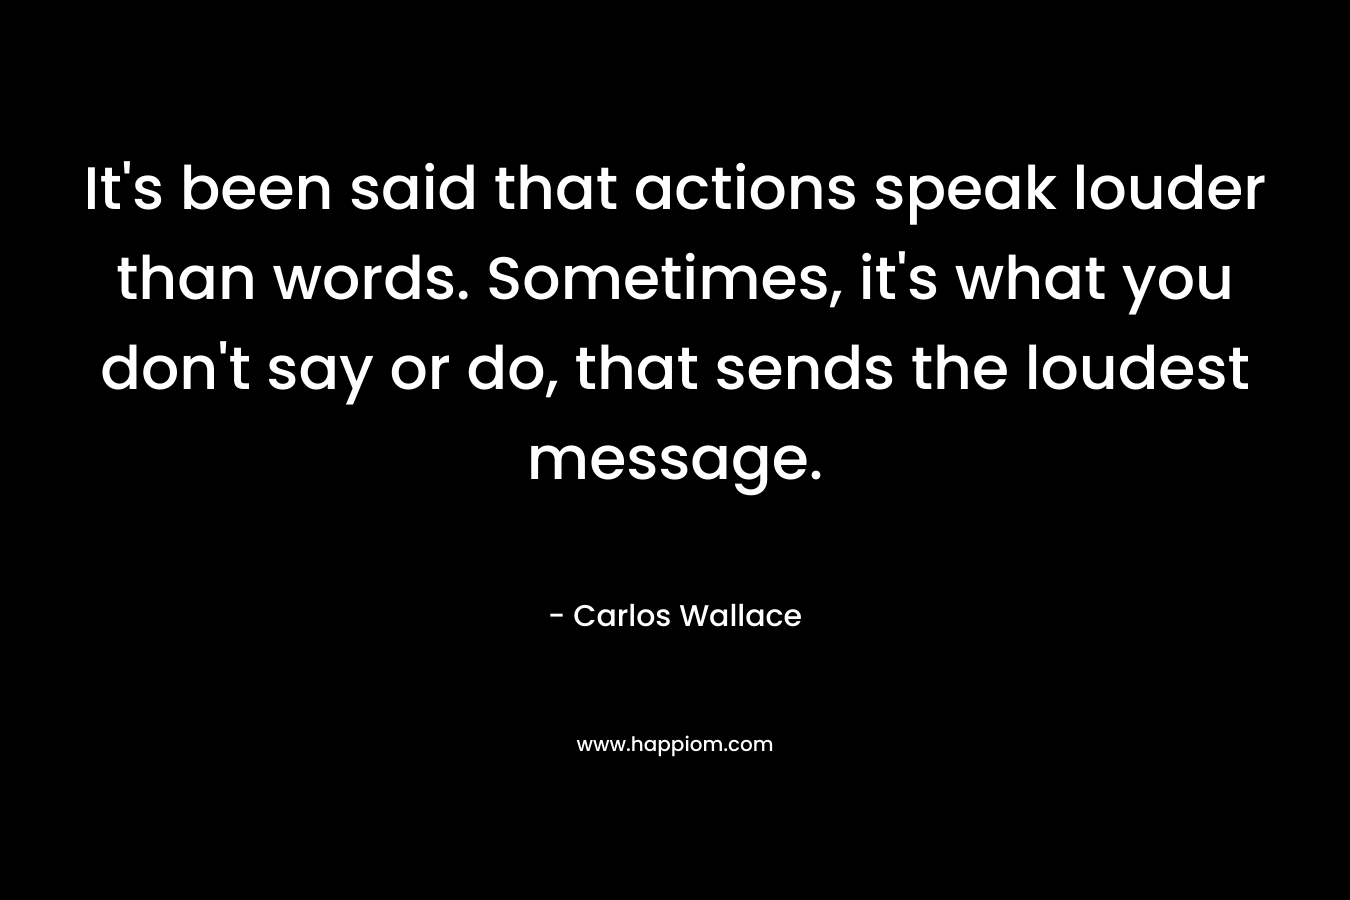 It's been said that actions speak louder than words. Sometimes, it's what you don't say or do, that sends the loudest message.